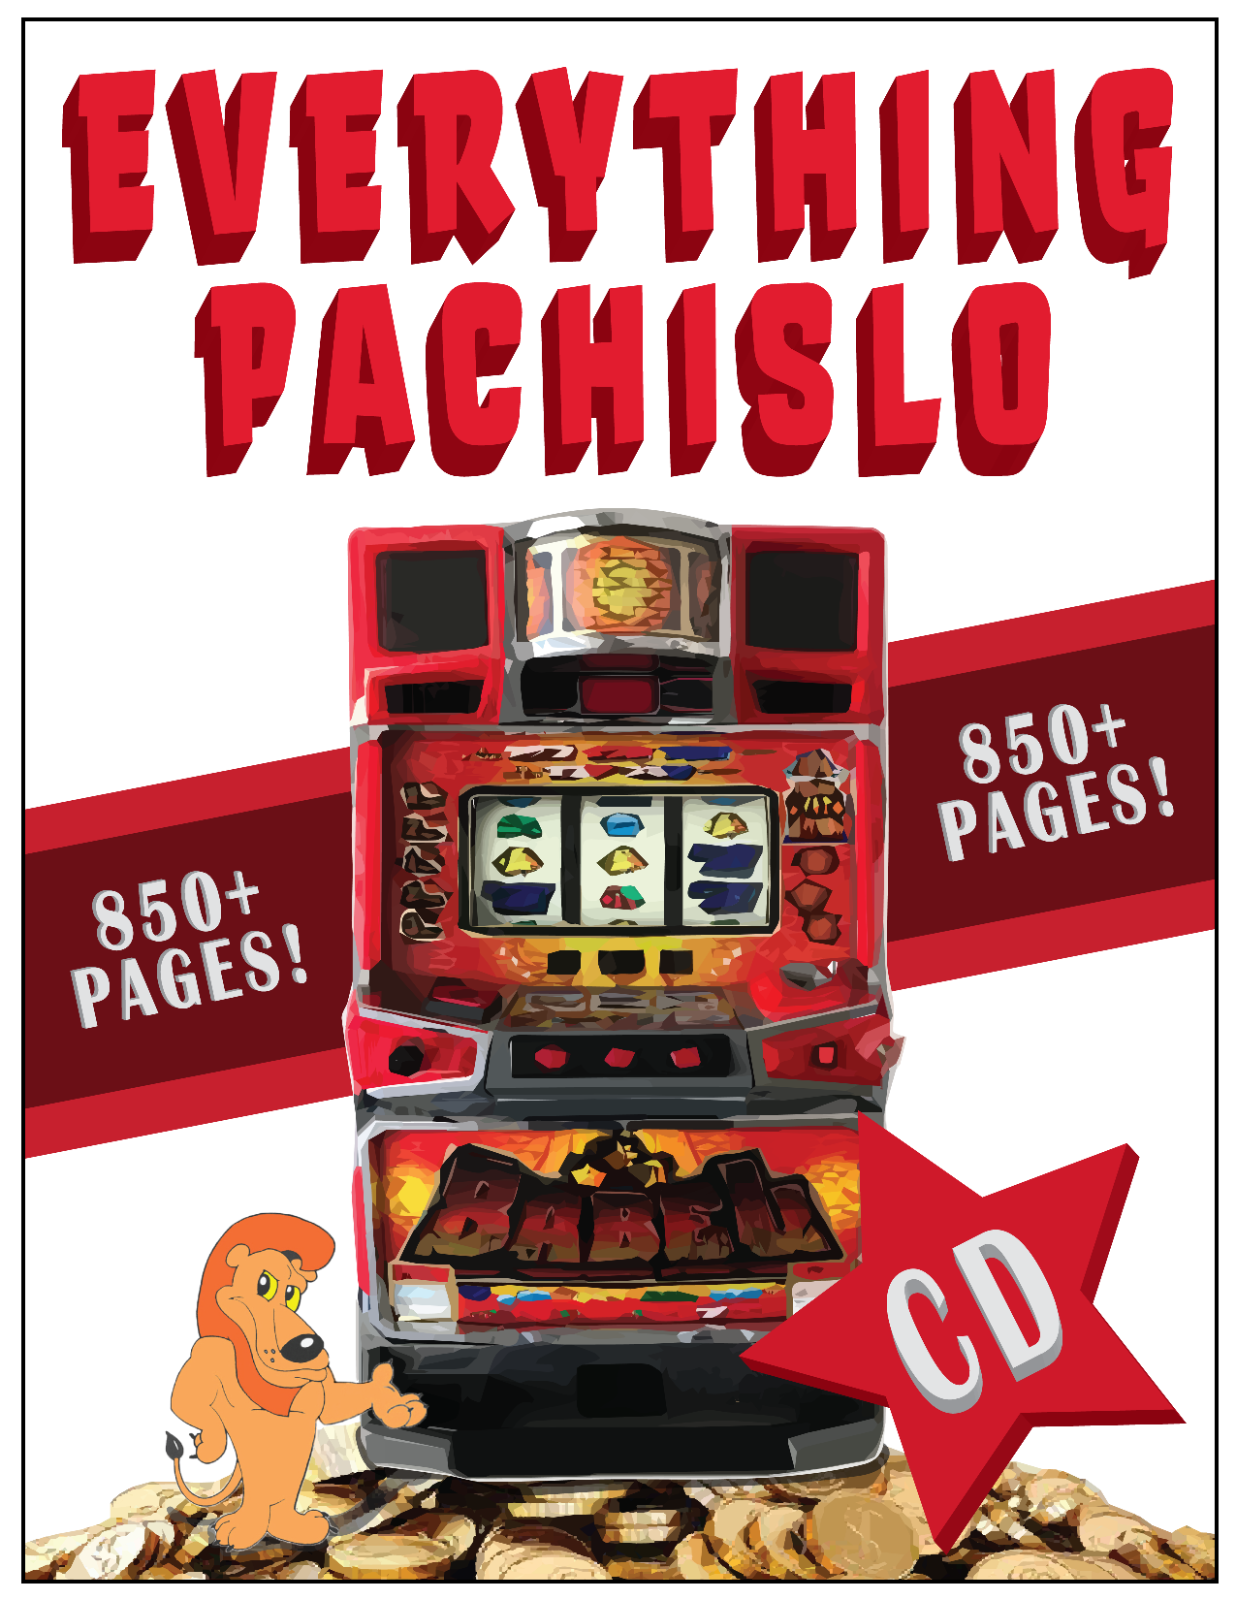 Pachislo Slot Machine Manual 859 Pages Everything Pachislo On Cd